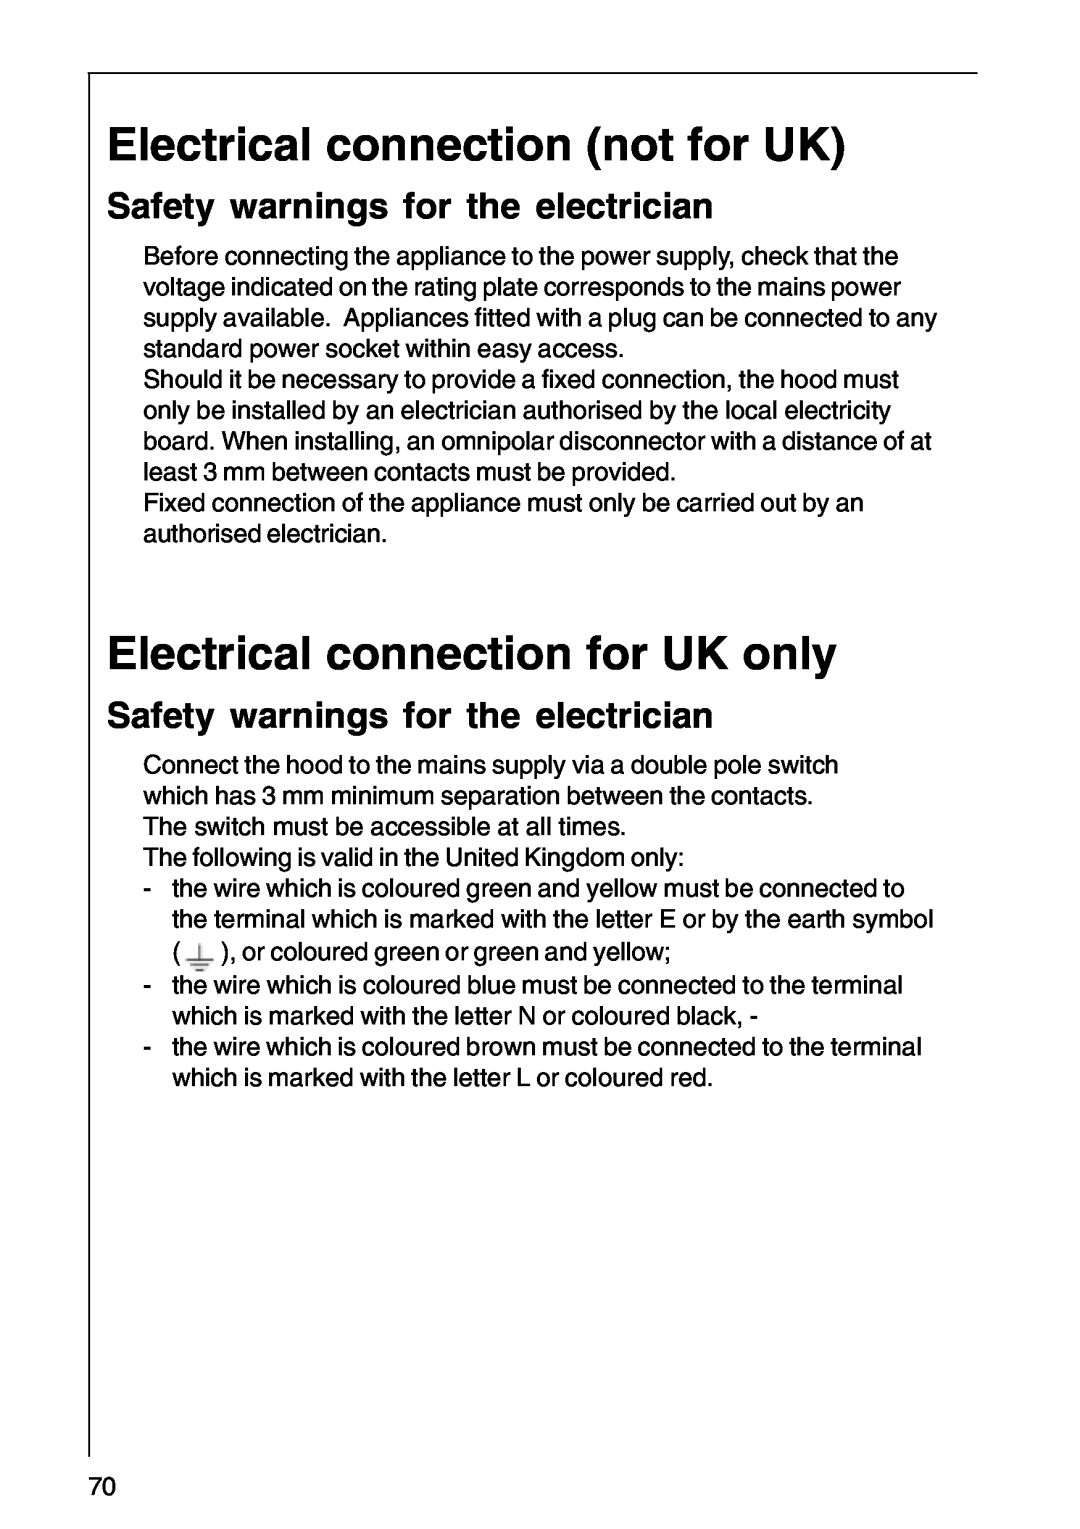 AEG CHDF 6260 Electrical connection not for UK, Electrical connection for UK only, Safety warnings for the electrician 